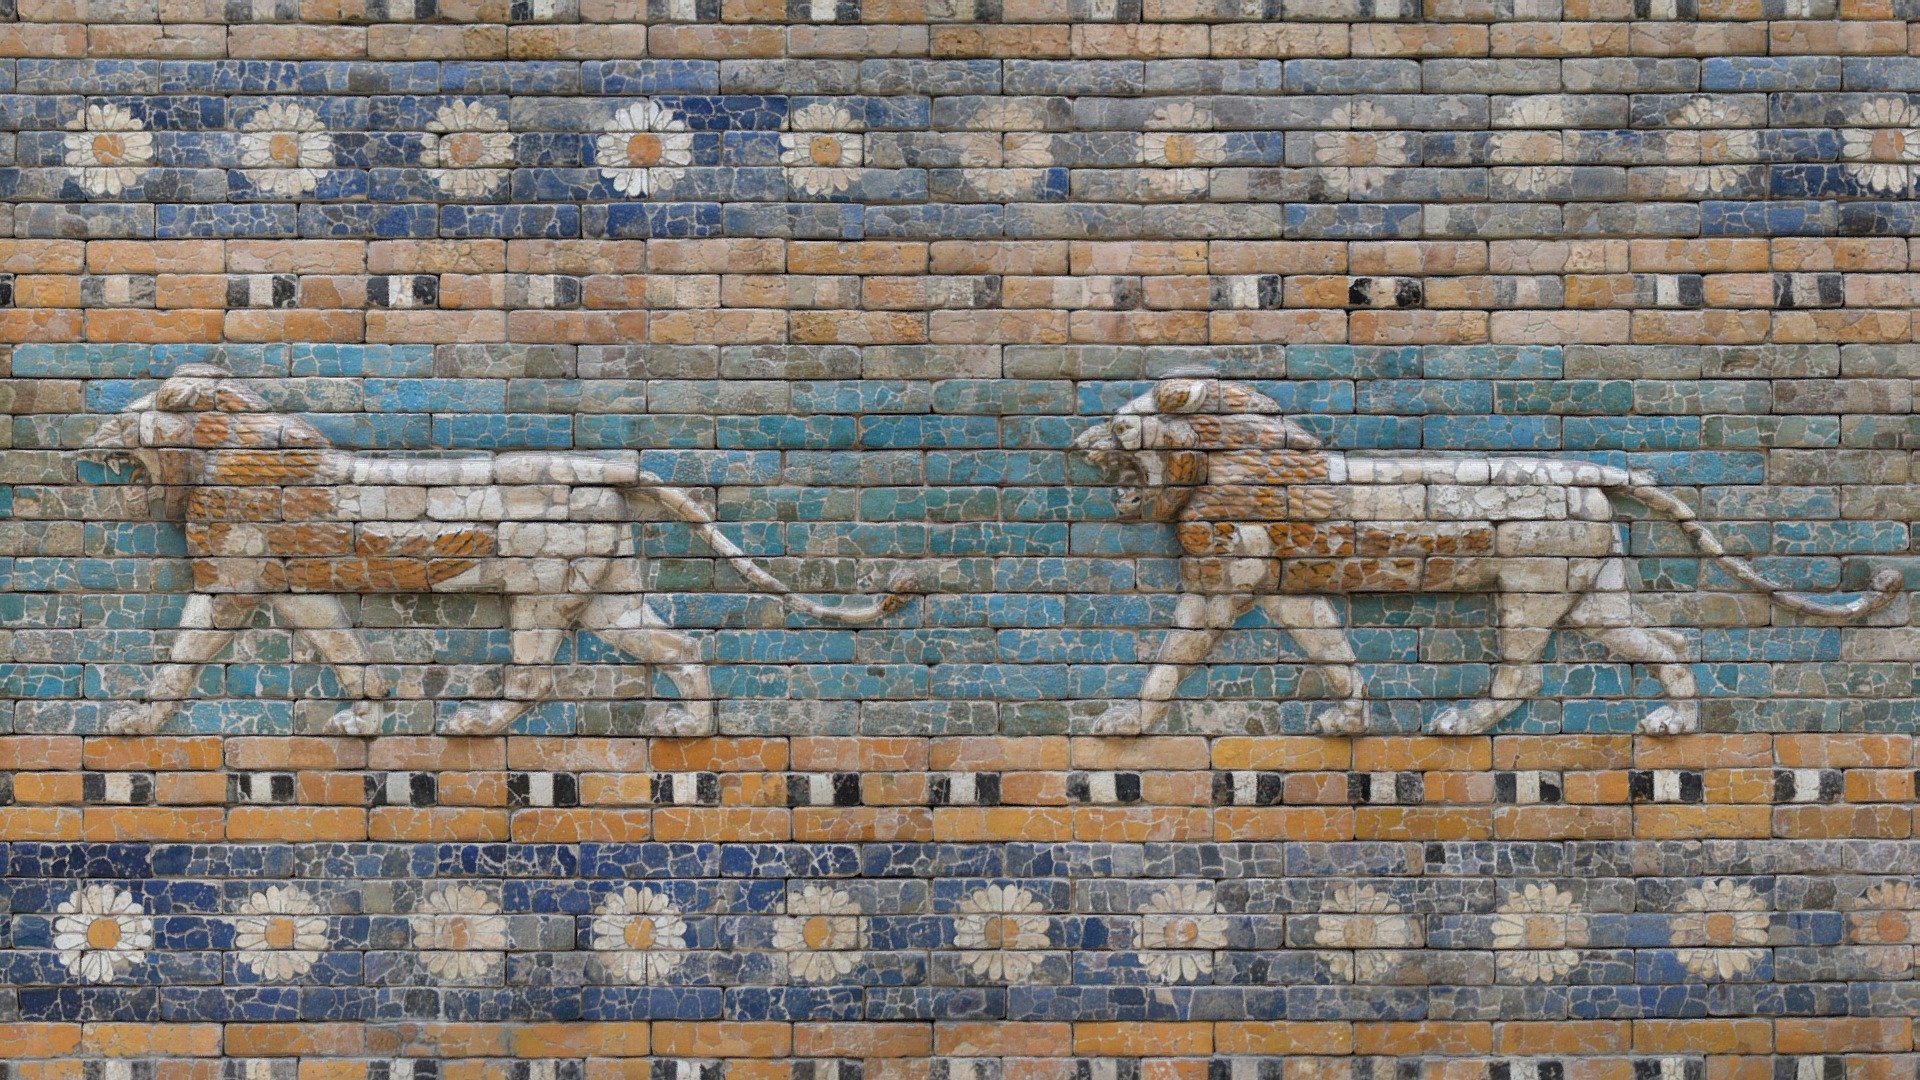 Striding lions from the Processional Way in Babylon

Pergamon Museum, Berlin - Striding lions (Processional Way, Babylon) - Buy Royalty Free 3D model by egiptologo91 3d model